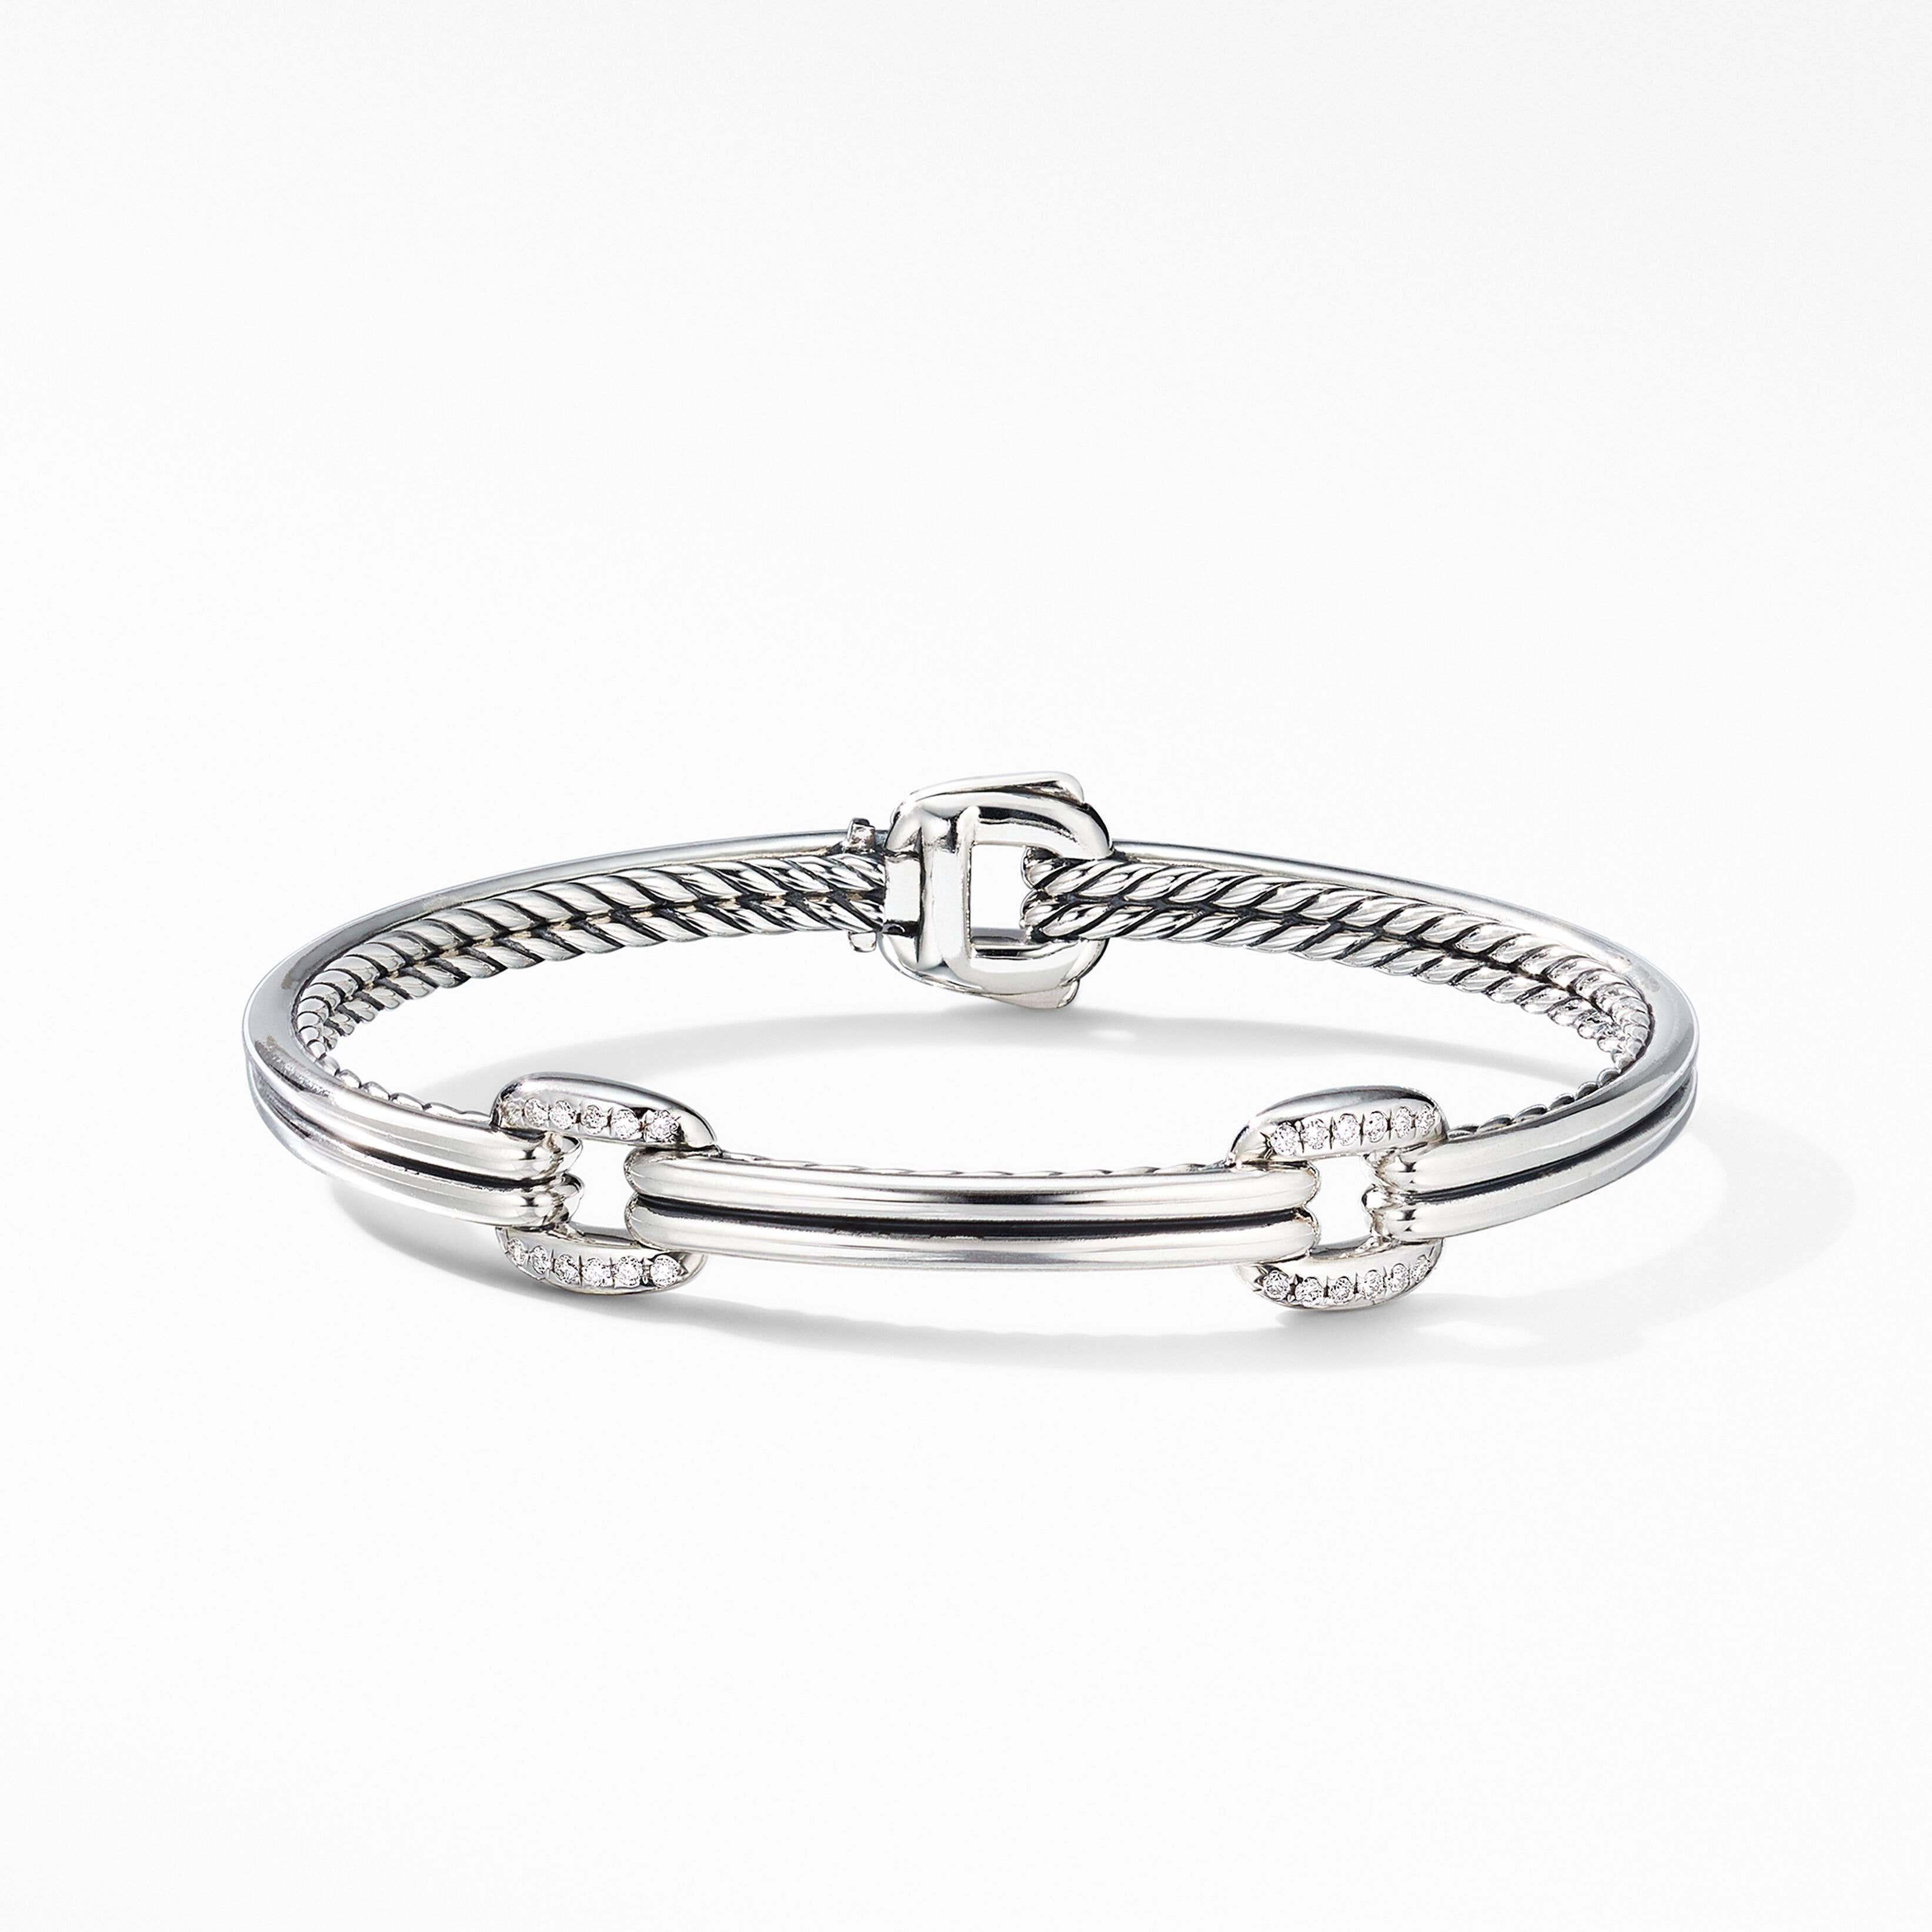 Thoroughbred Double Link Bracelet in Sterling Silver with Pavé Diamonds